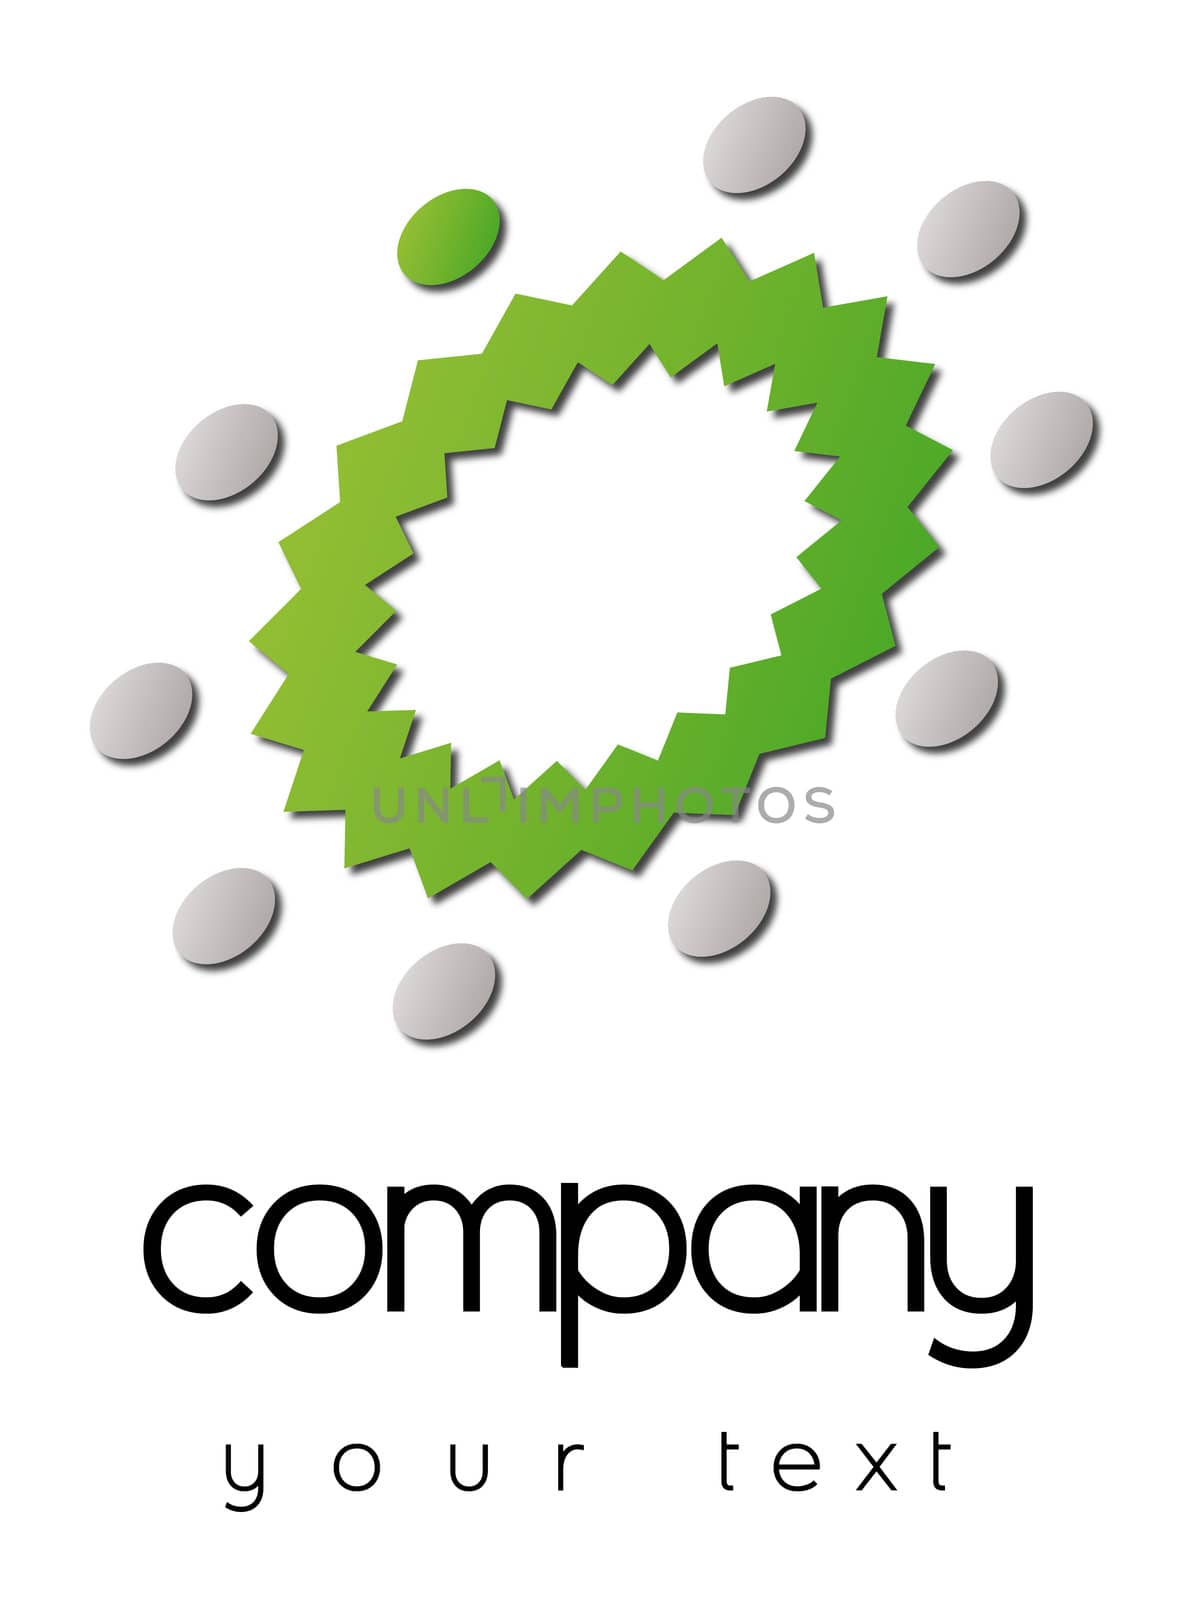 A business logo with green and grey circles around a green crown